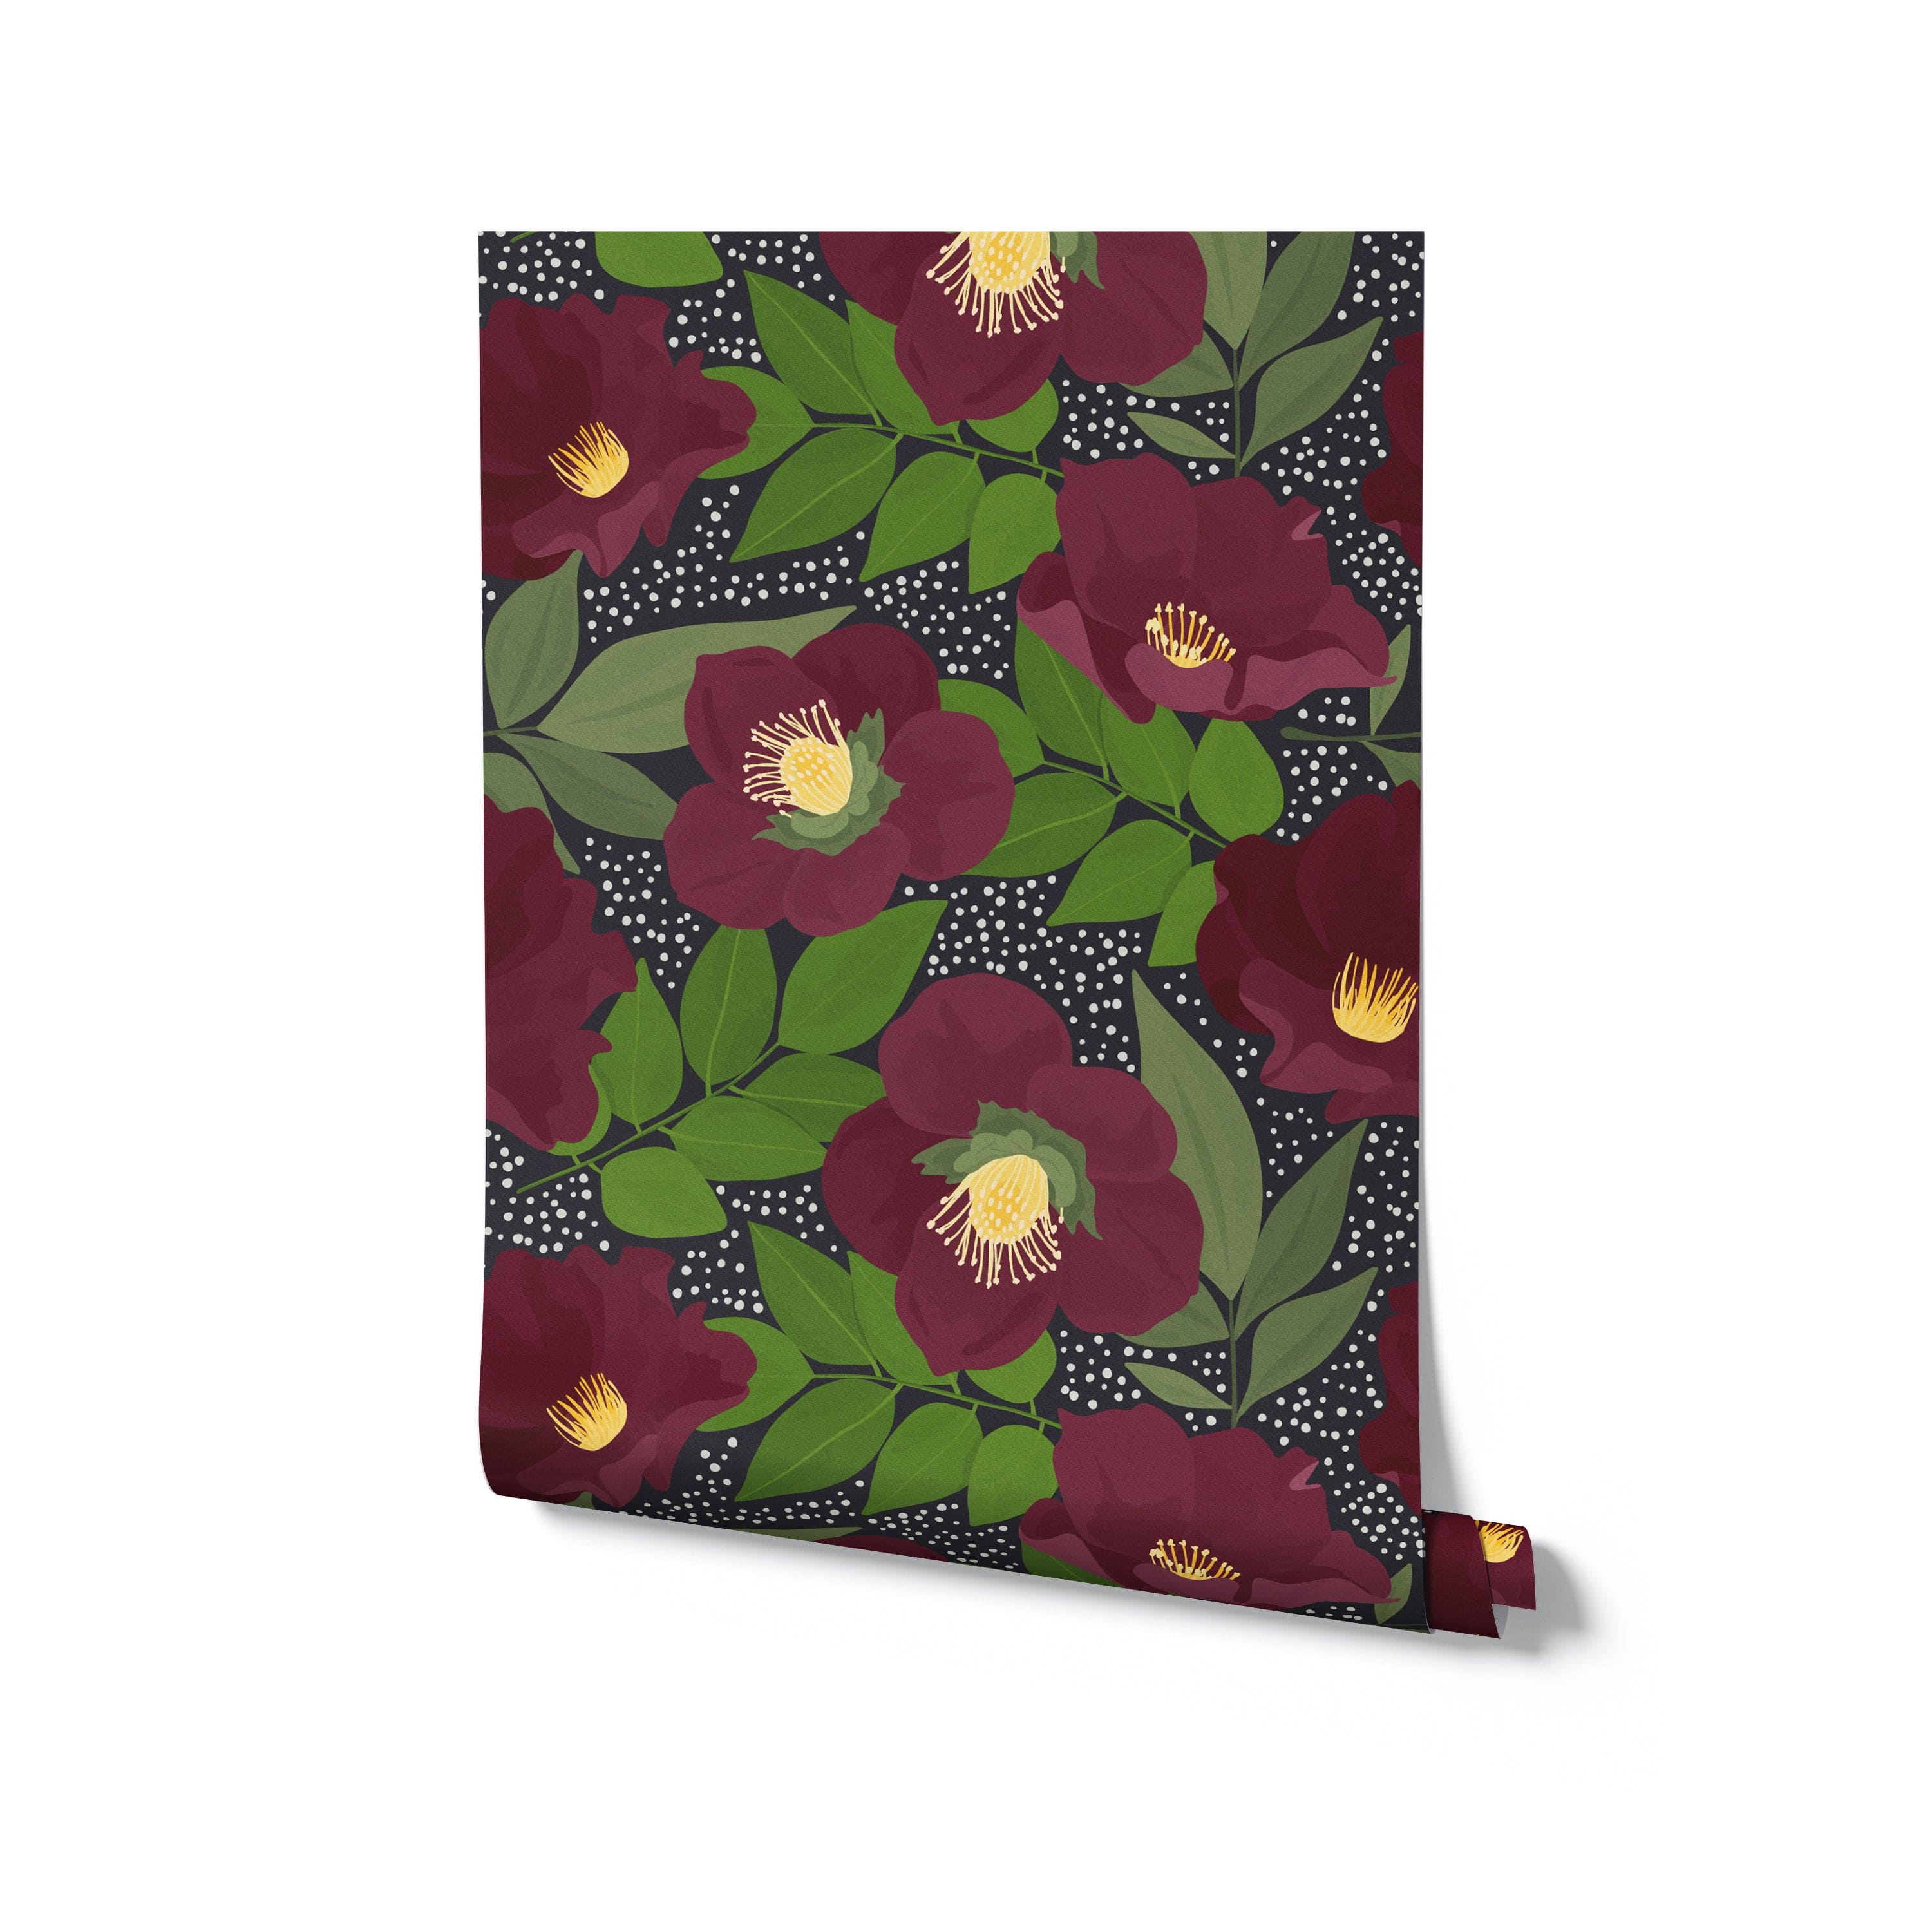 A rolled sample of the Merlot Floral Wallpaper displaying large, dark red flowers with lush green leaves on a dotted background, emphasizing the wallpaper's vibrant design and rich colors, suitable for a striking interior statement.